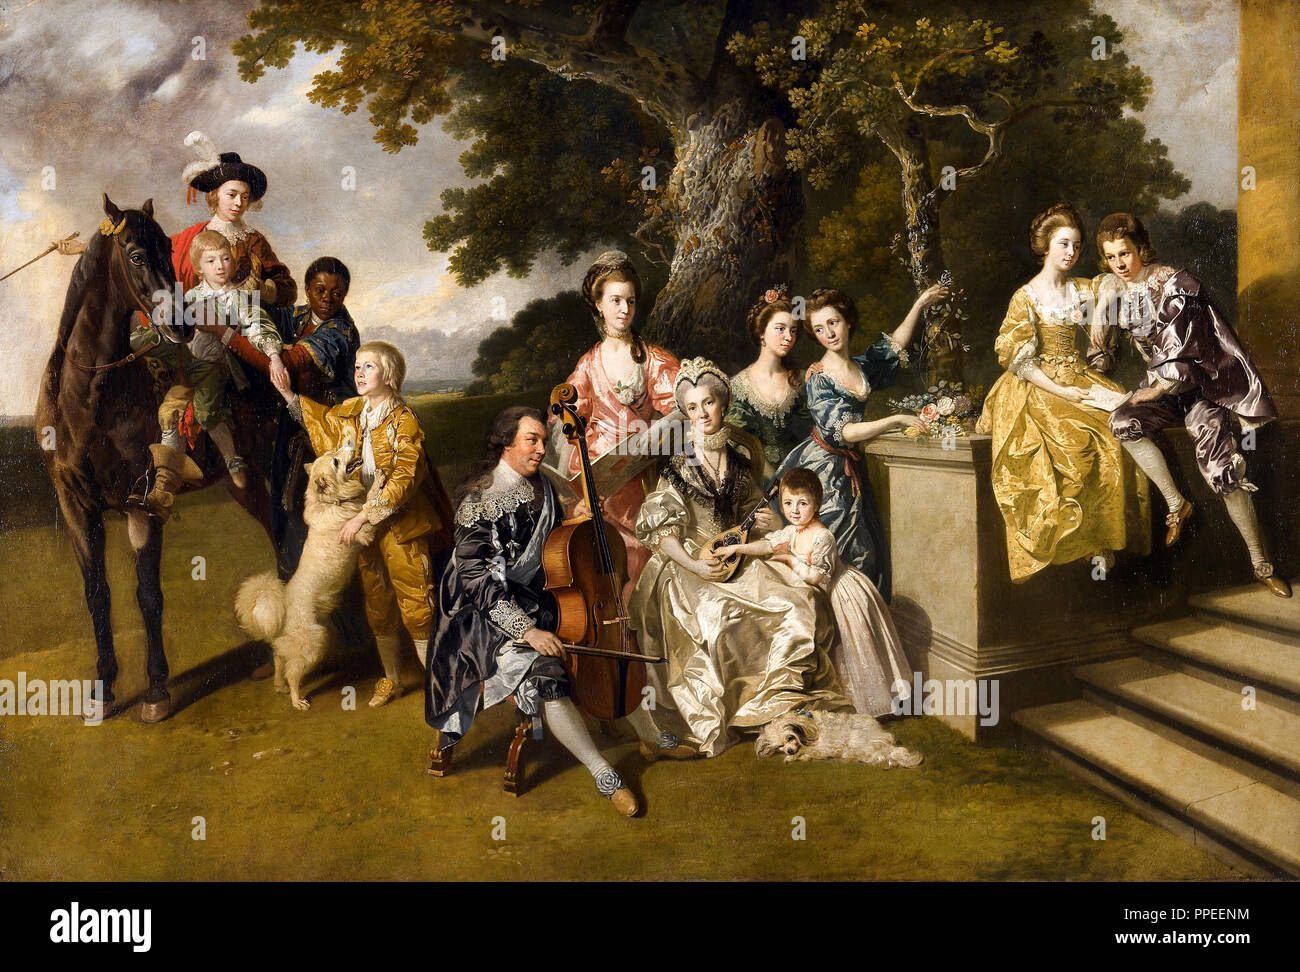 Johann Zoffany - The Family of Sir William Young. Circa 1767. Oil on canvas. Walker Art Gallery, Liverpool, England. Stock Photo